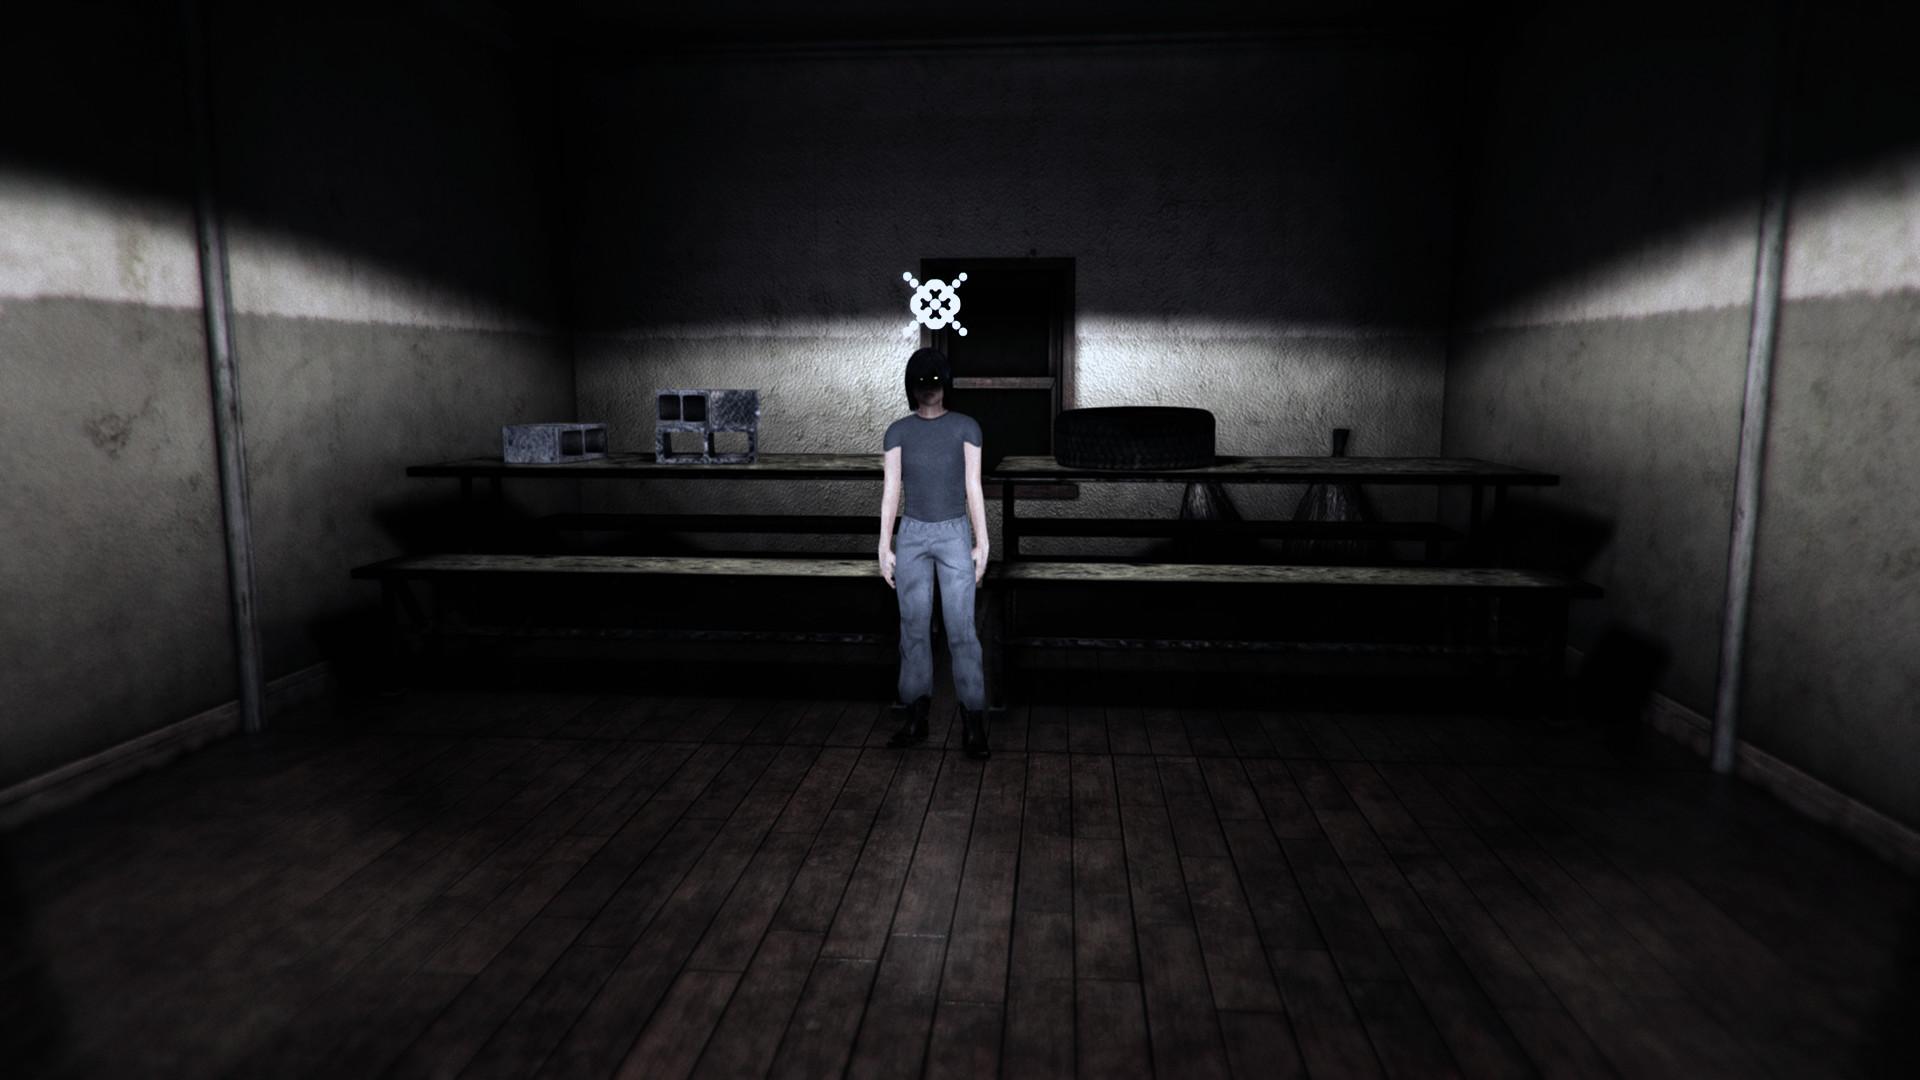 Screenshot №10 from game Insane Decay of Mind: The Labyrinth